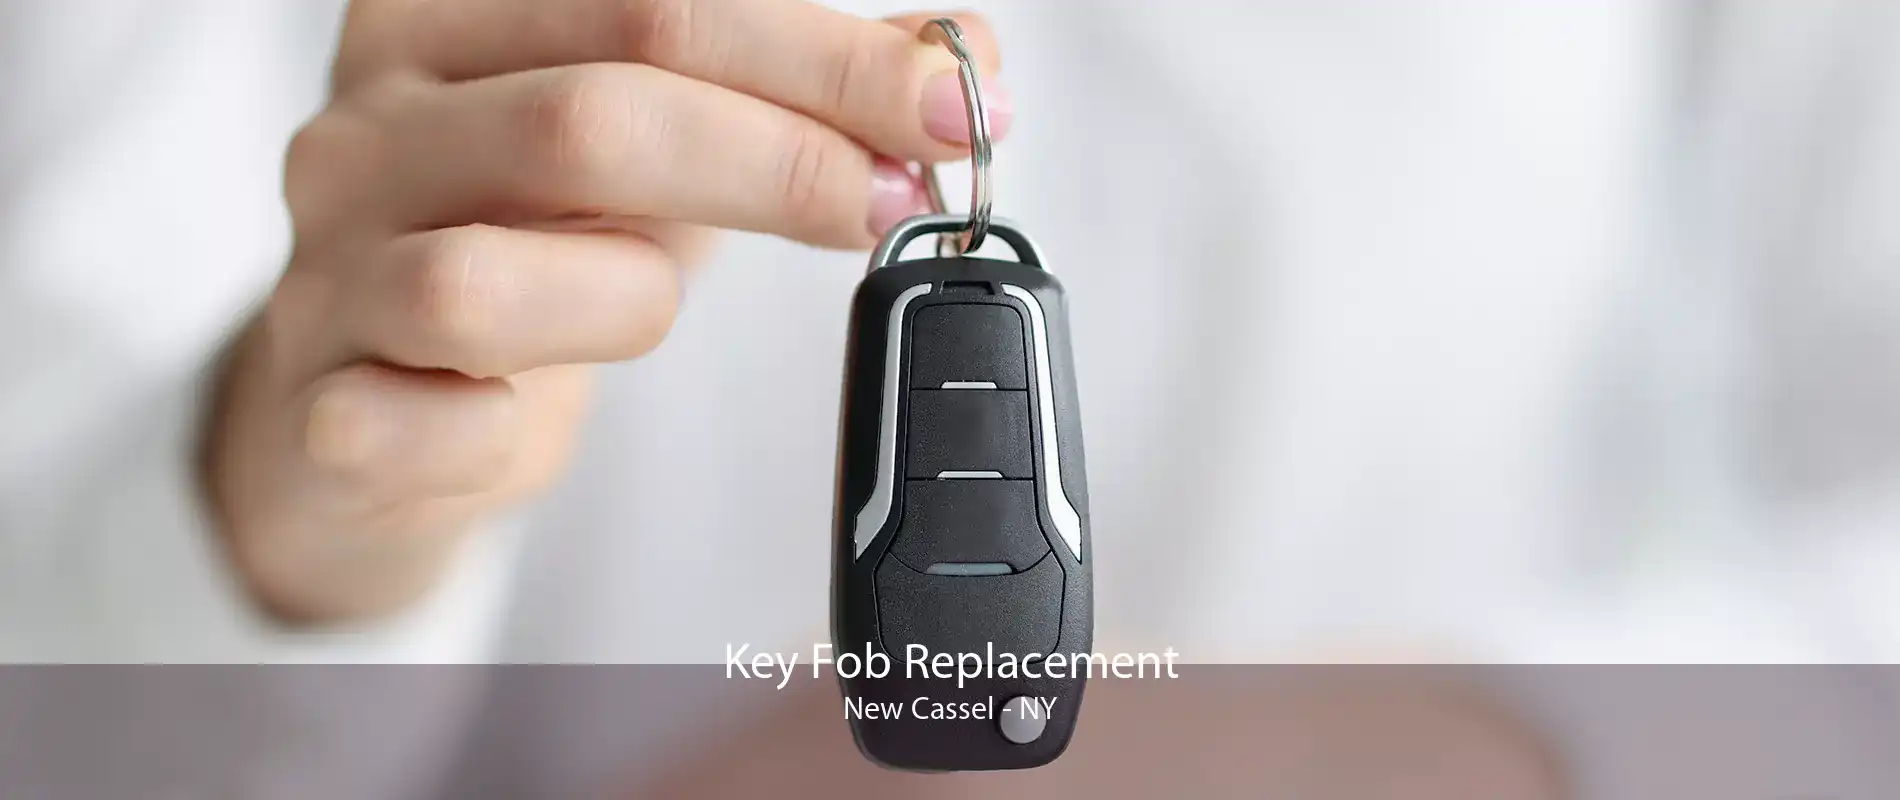 Key Fob Replacement New Cassel - NY